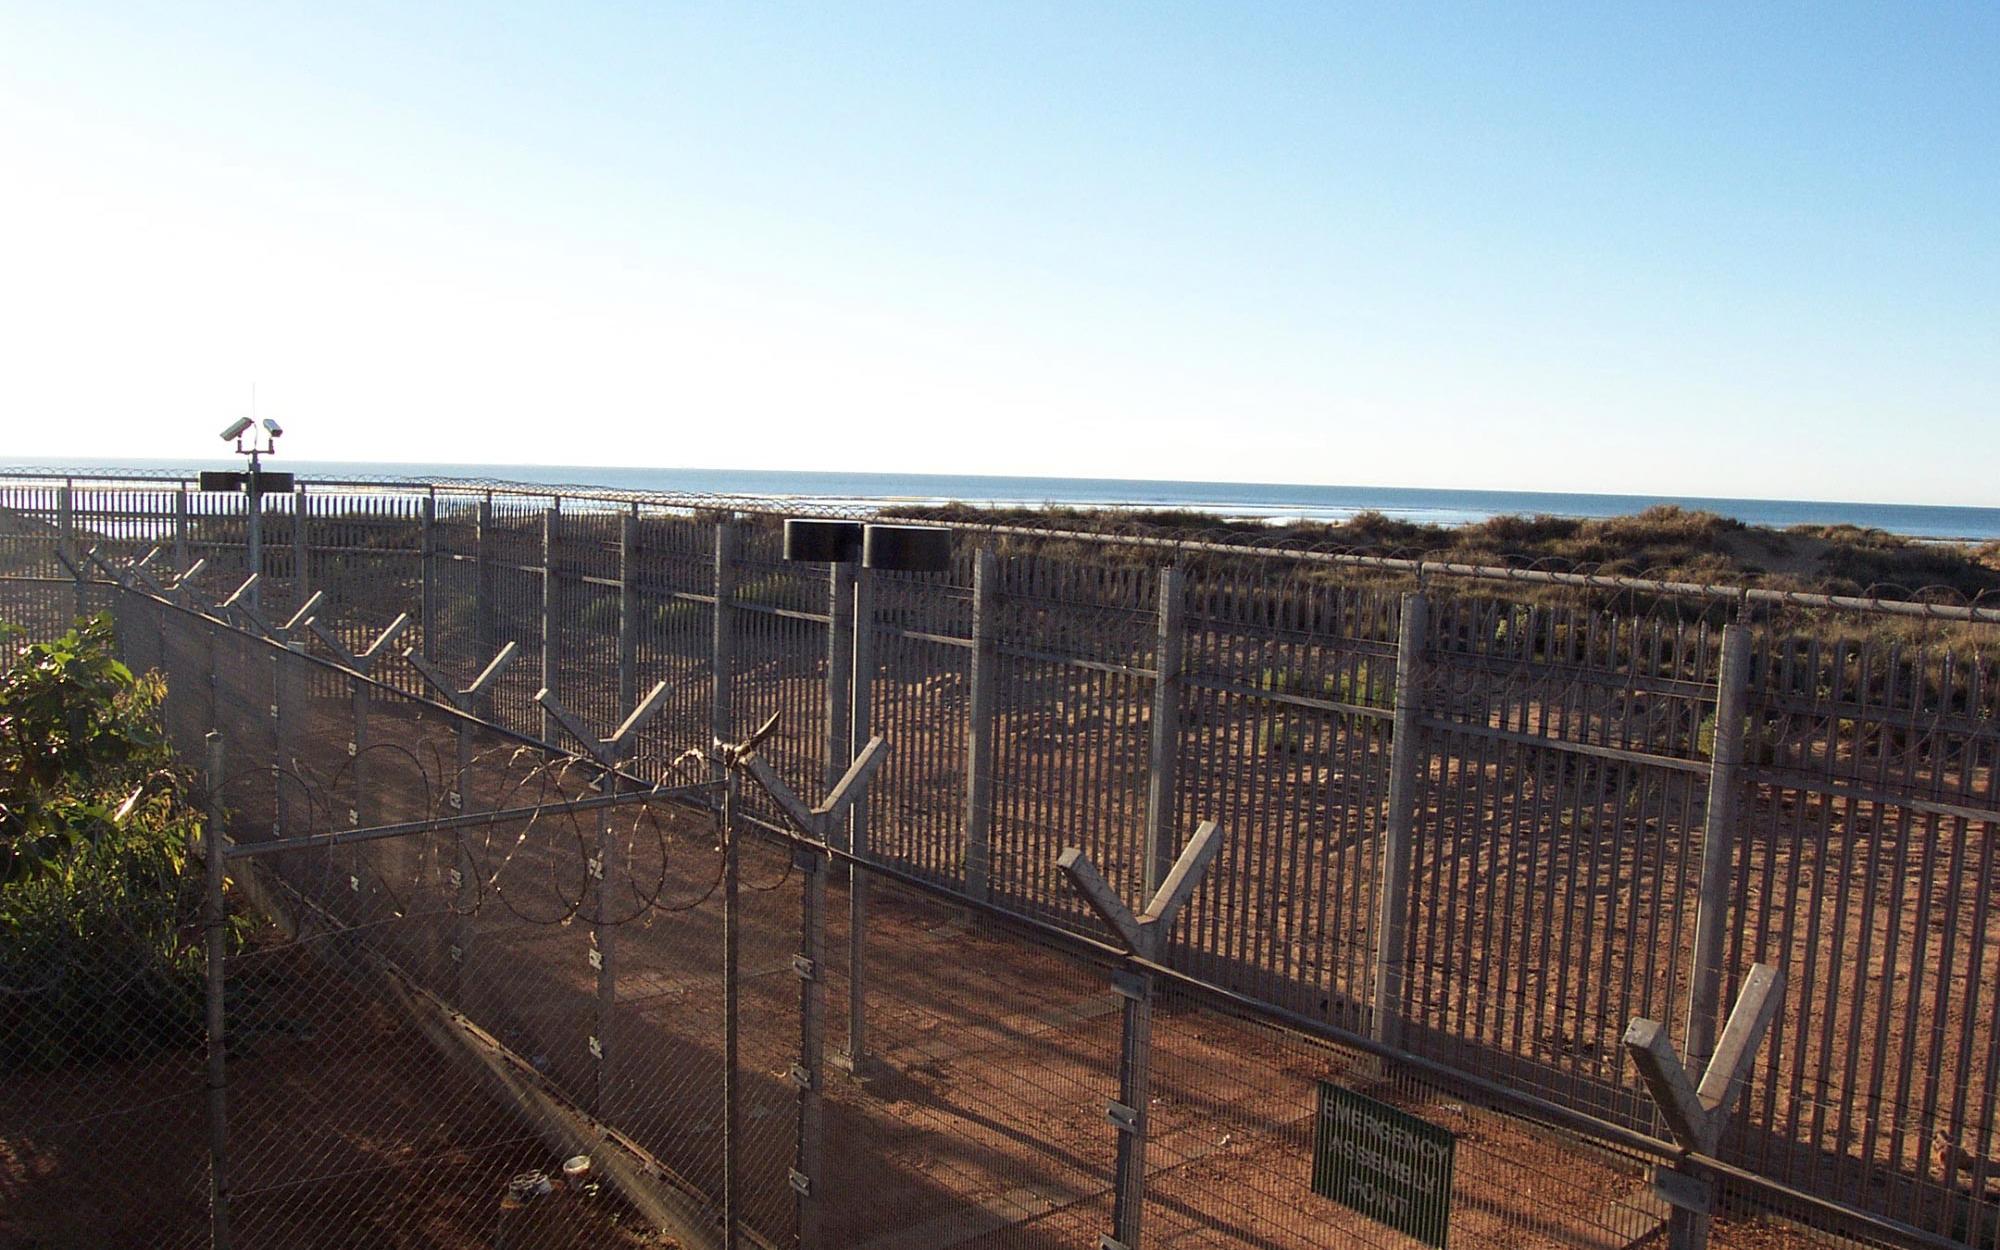 View through the fence at the Port Hedland Detention Centre.